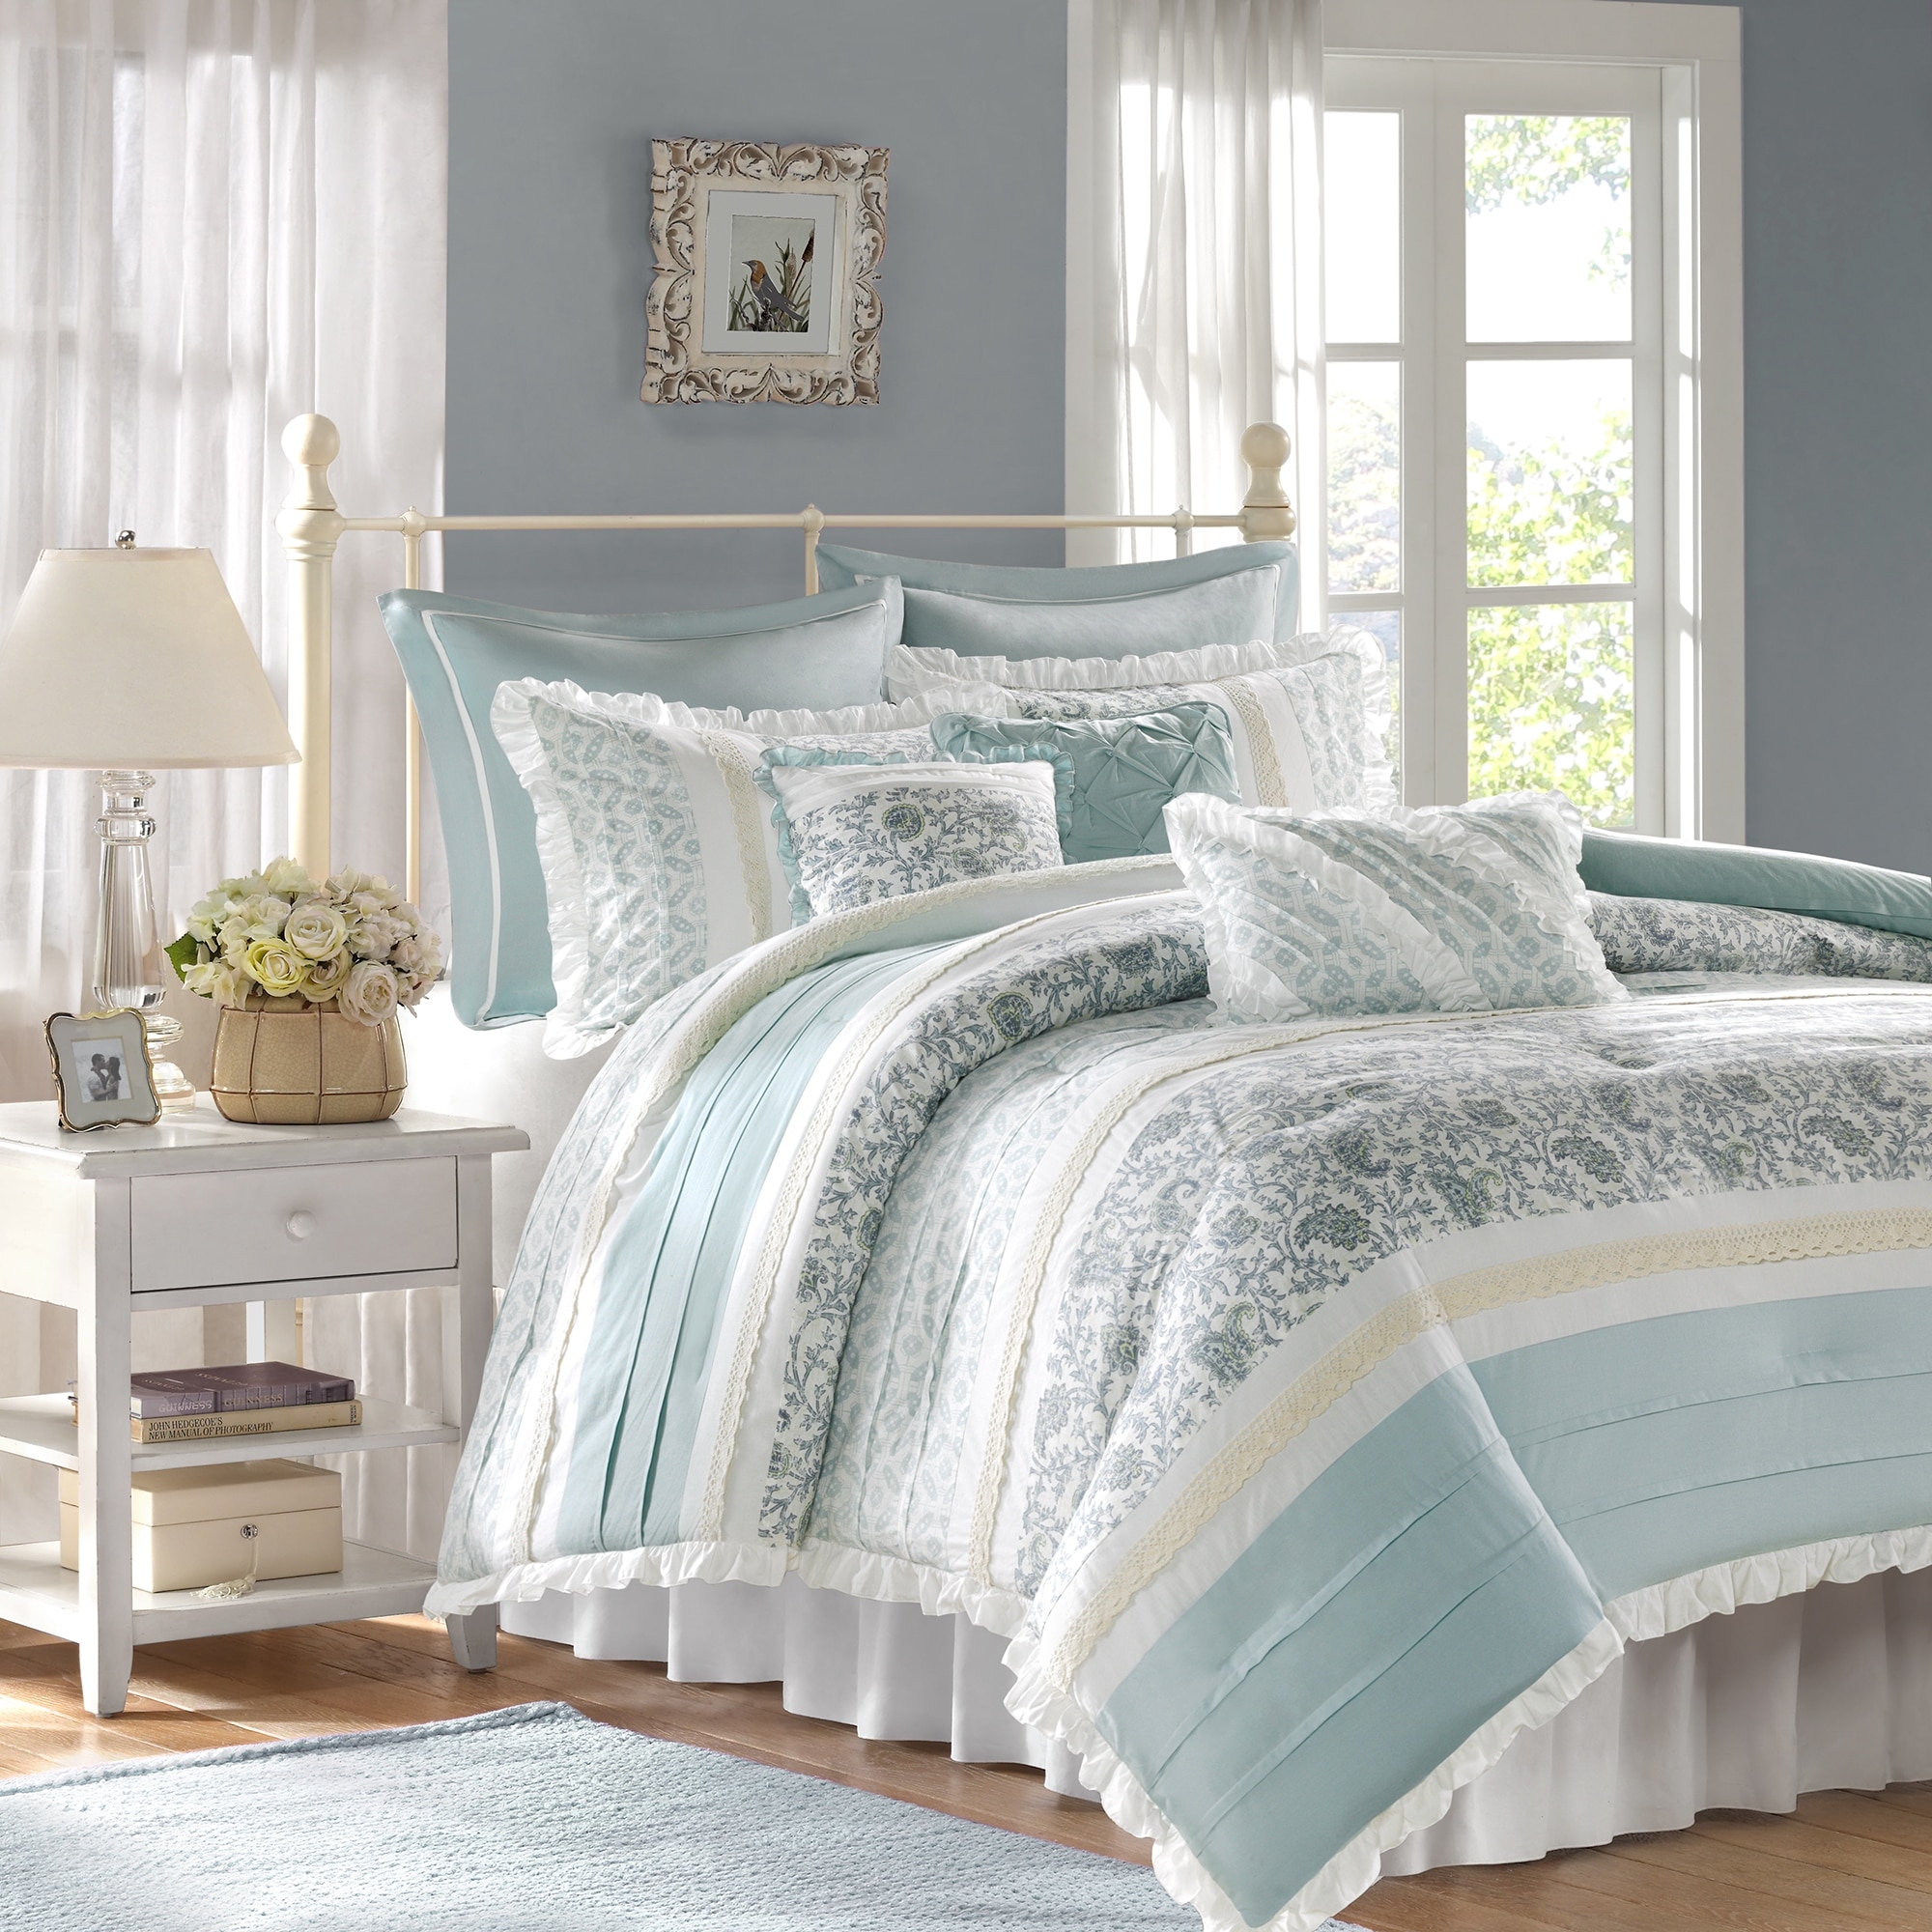 Shabby Chic® - King Comforter Set, Soft Cotton Bedding with Matching Shams,  Romantic Ruffled Home Decor for All Seasons (Brette Blue, King)